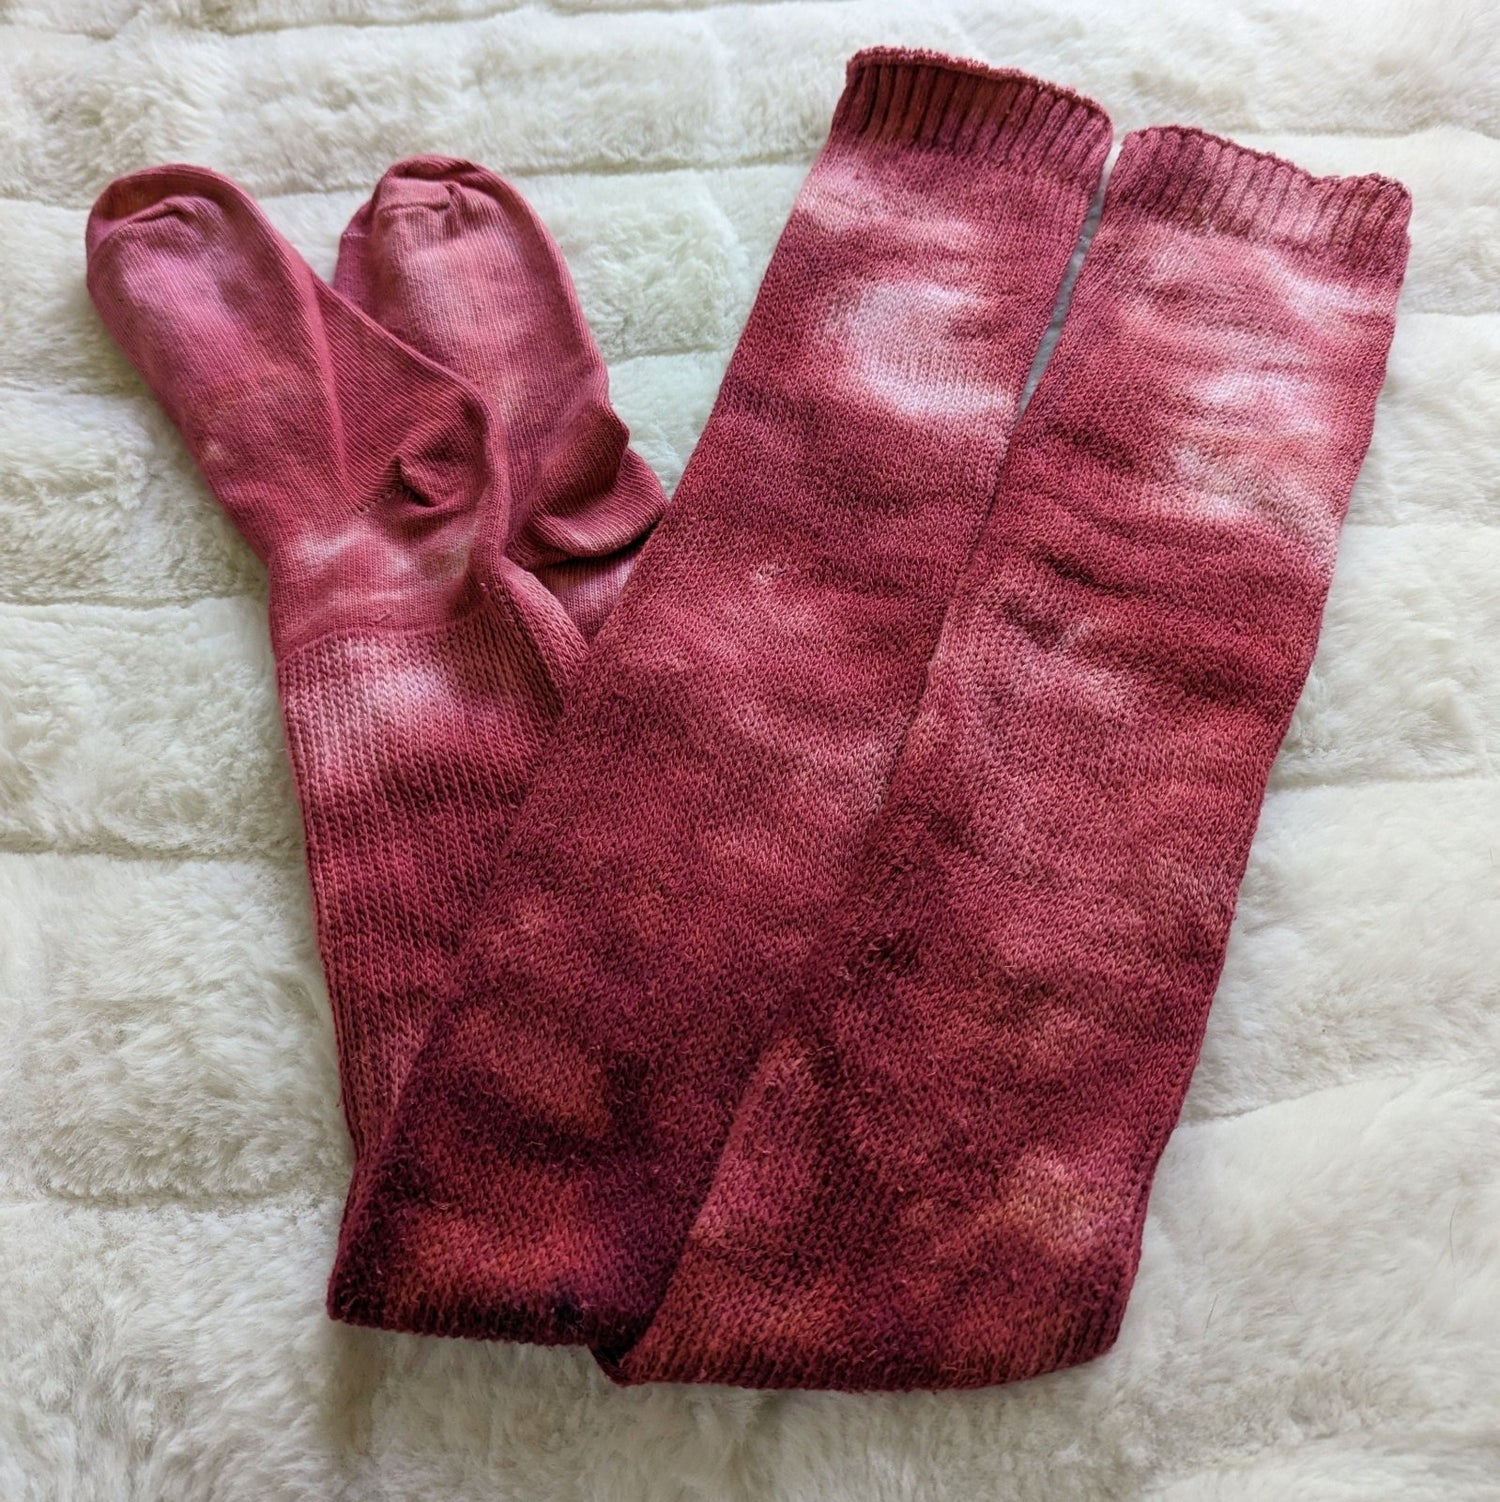 Cozy Socks: Pomegranate - The Fourth Place